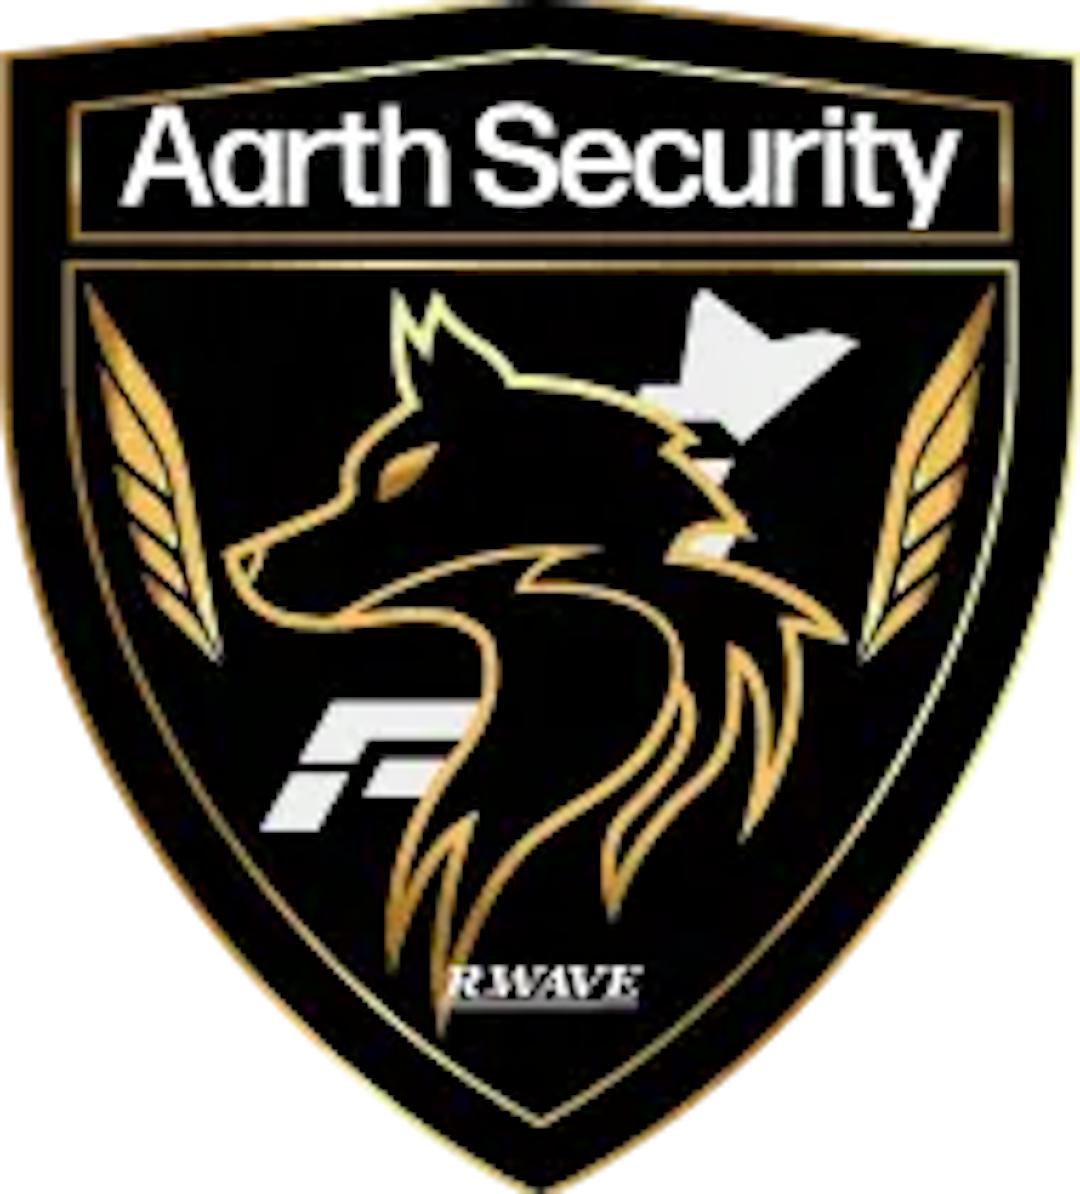 Aarth Security